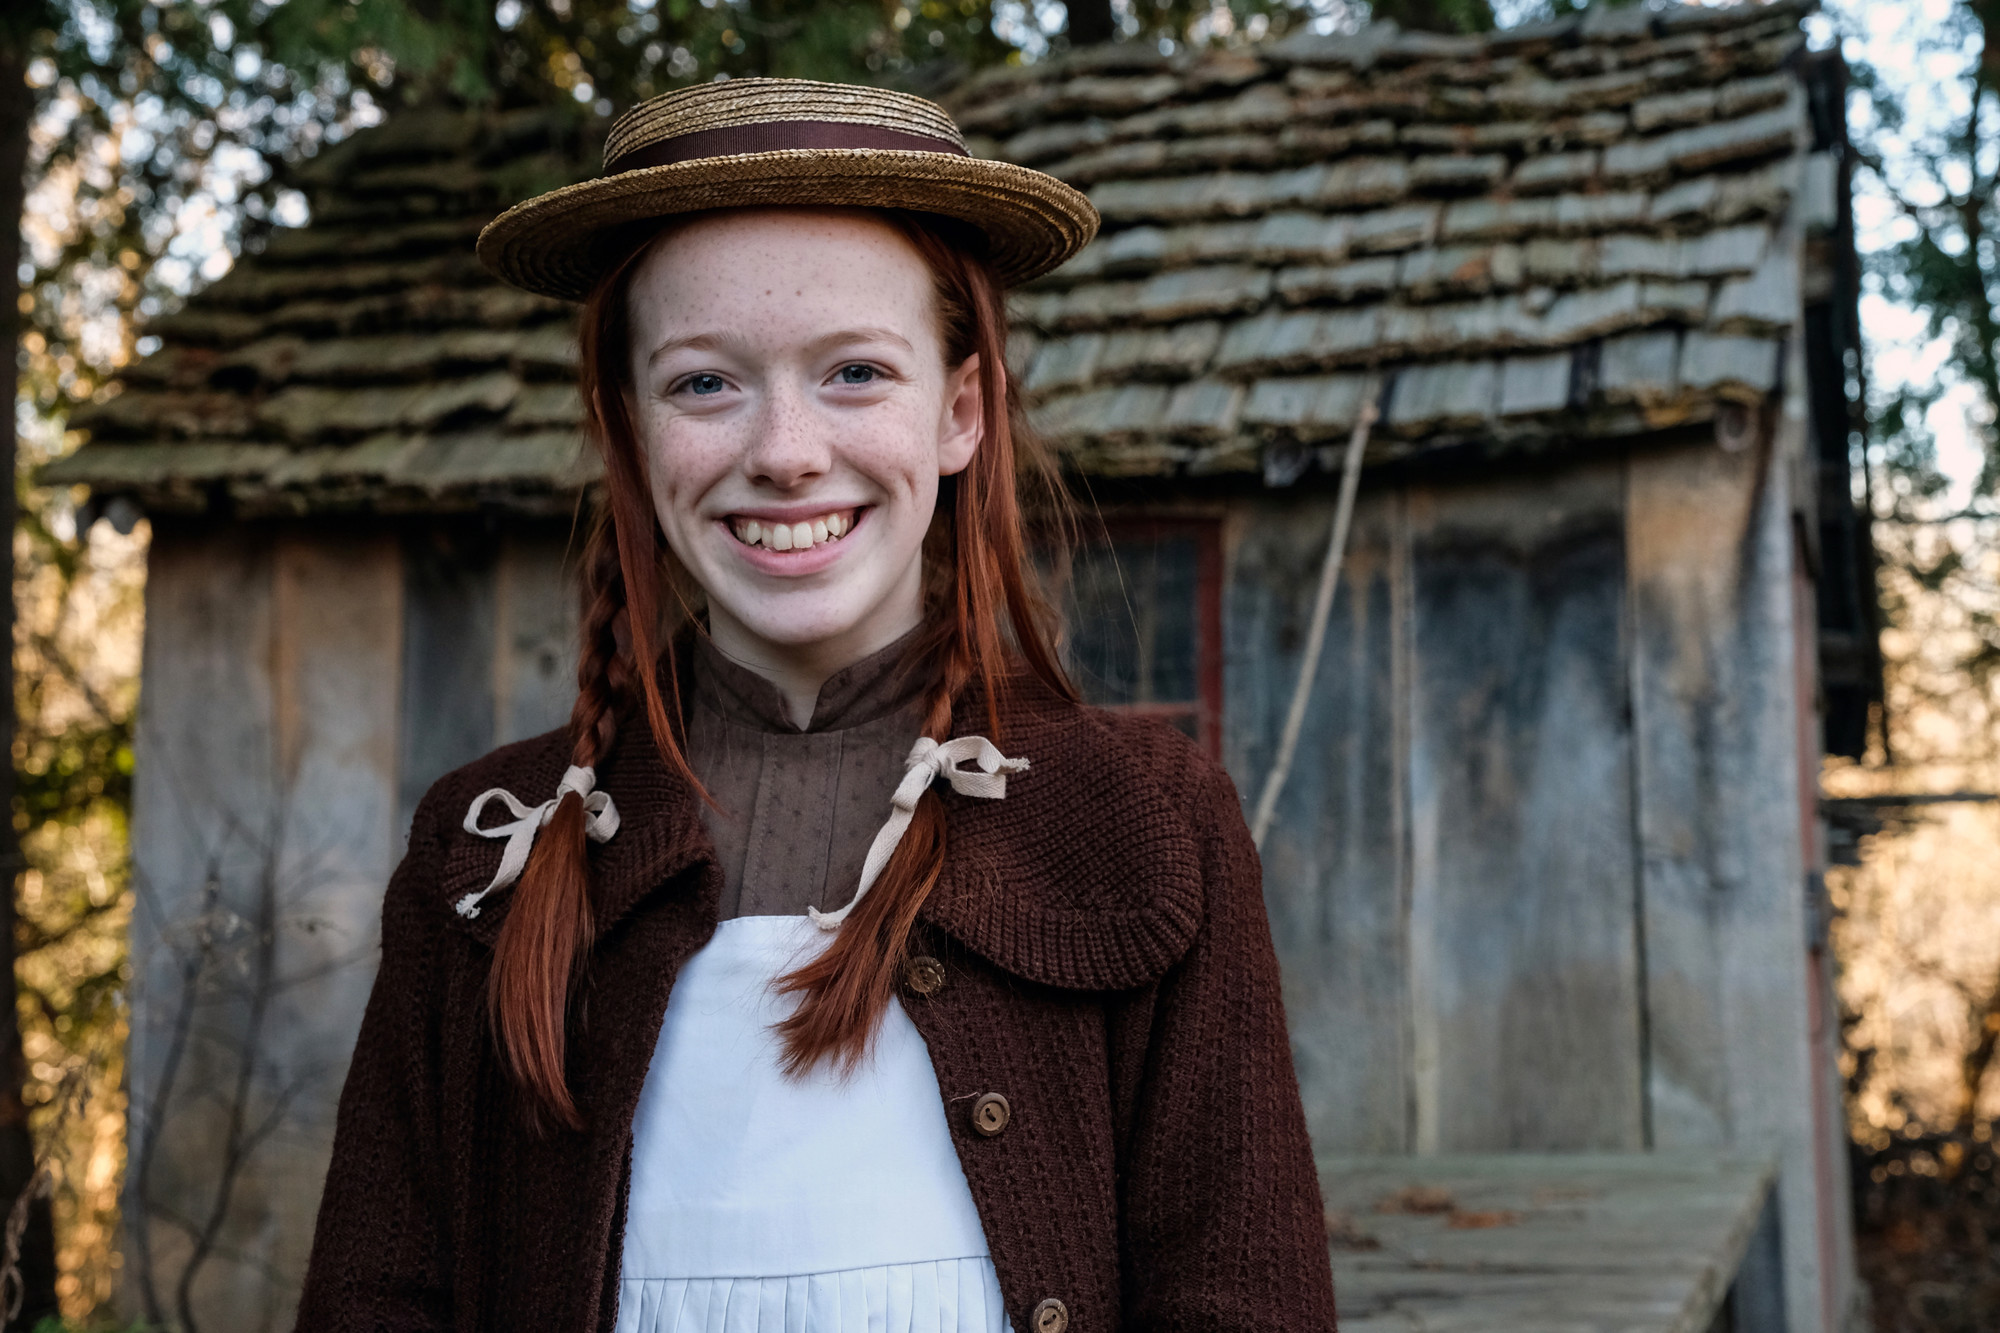 Family friendly 'Anne with an E' returns to Netflix | The Sumter Item